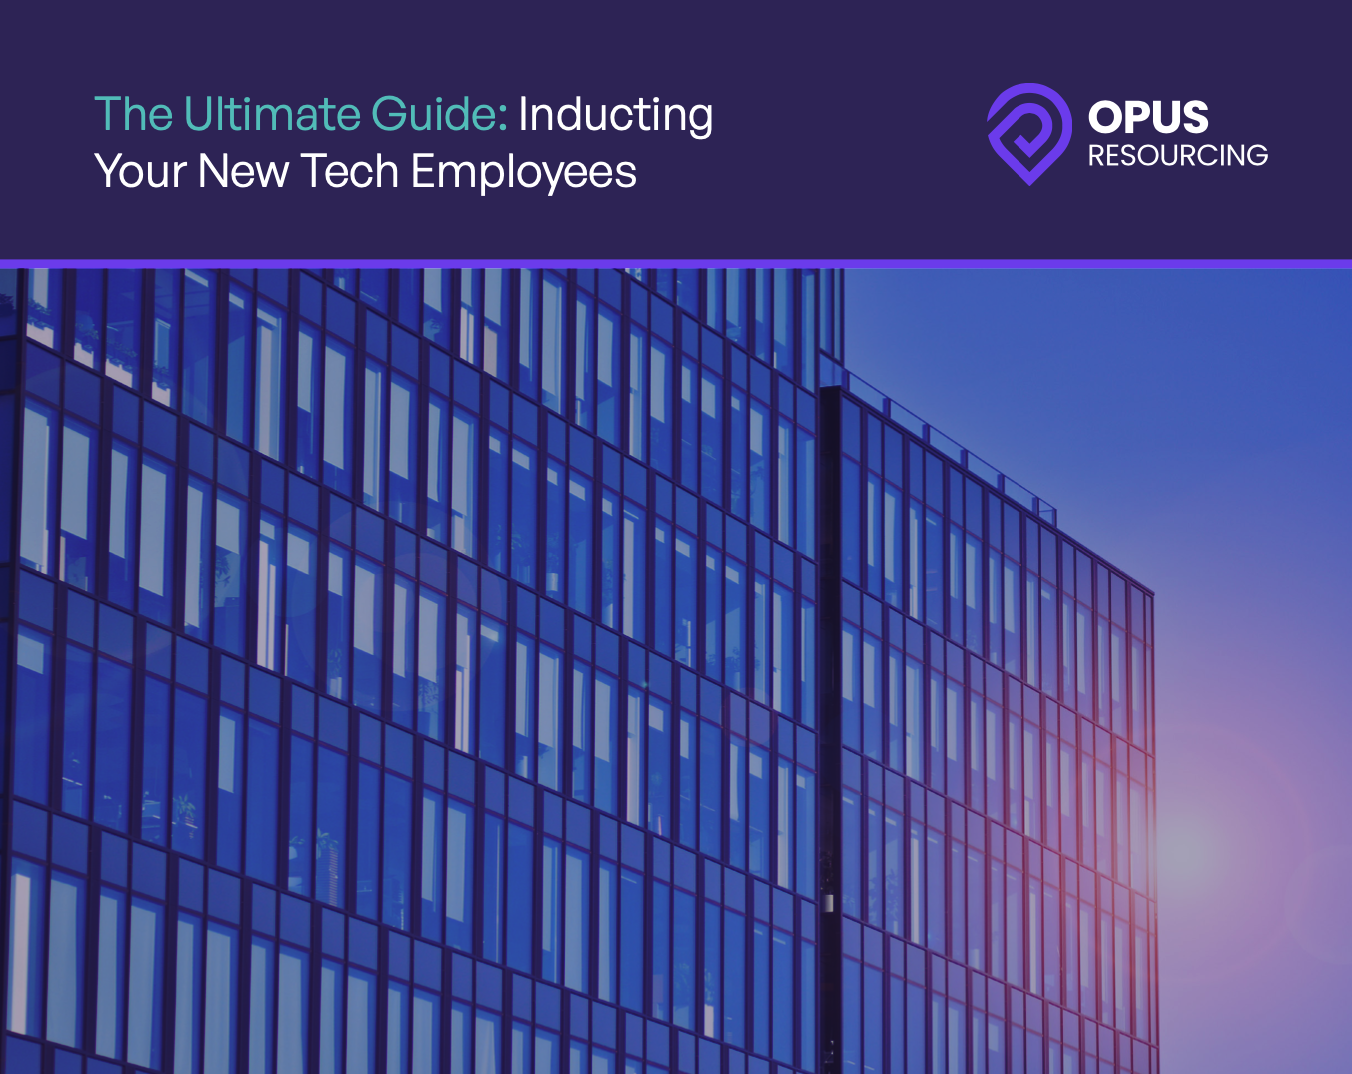 Client Report – The Ultimate Guide To Inducting Your New Tech Employees